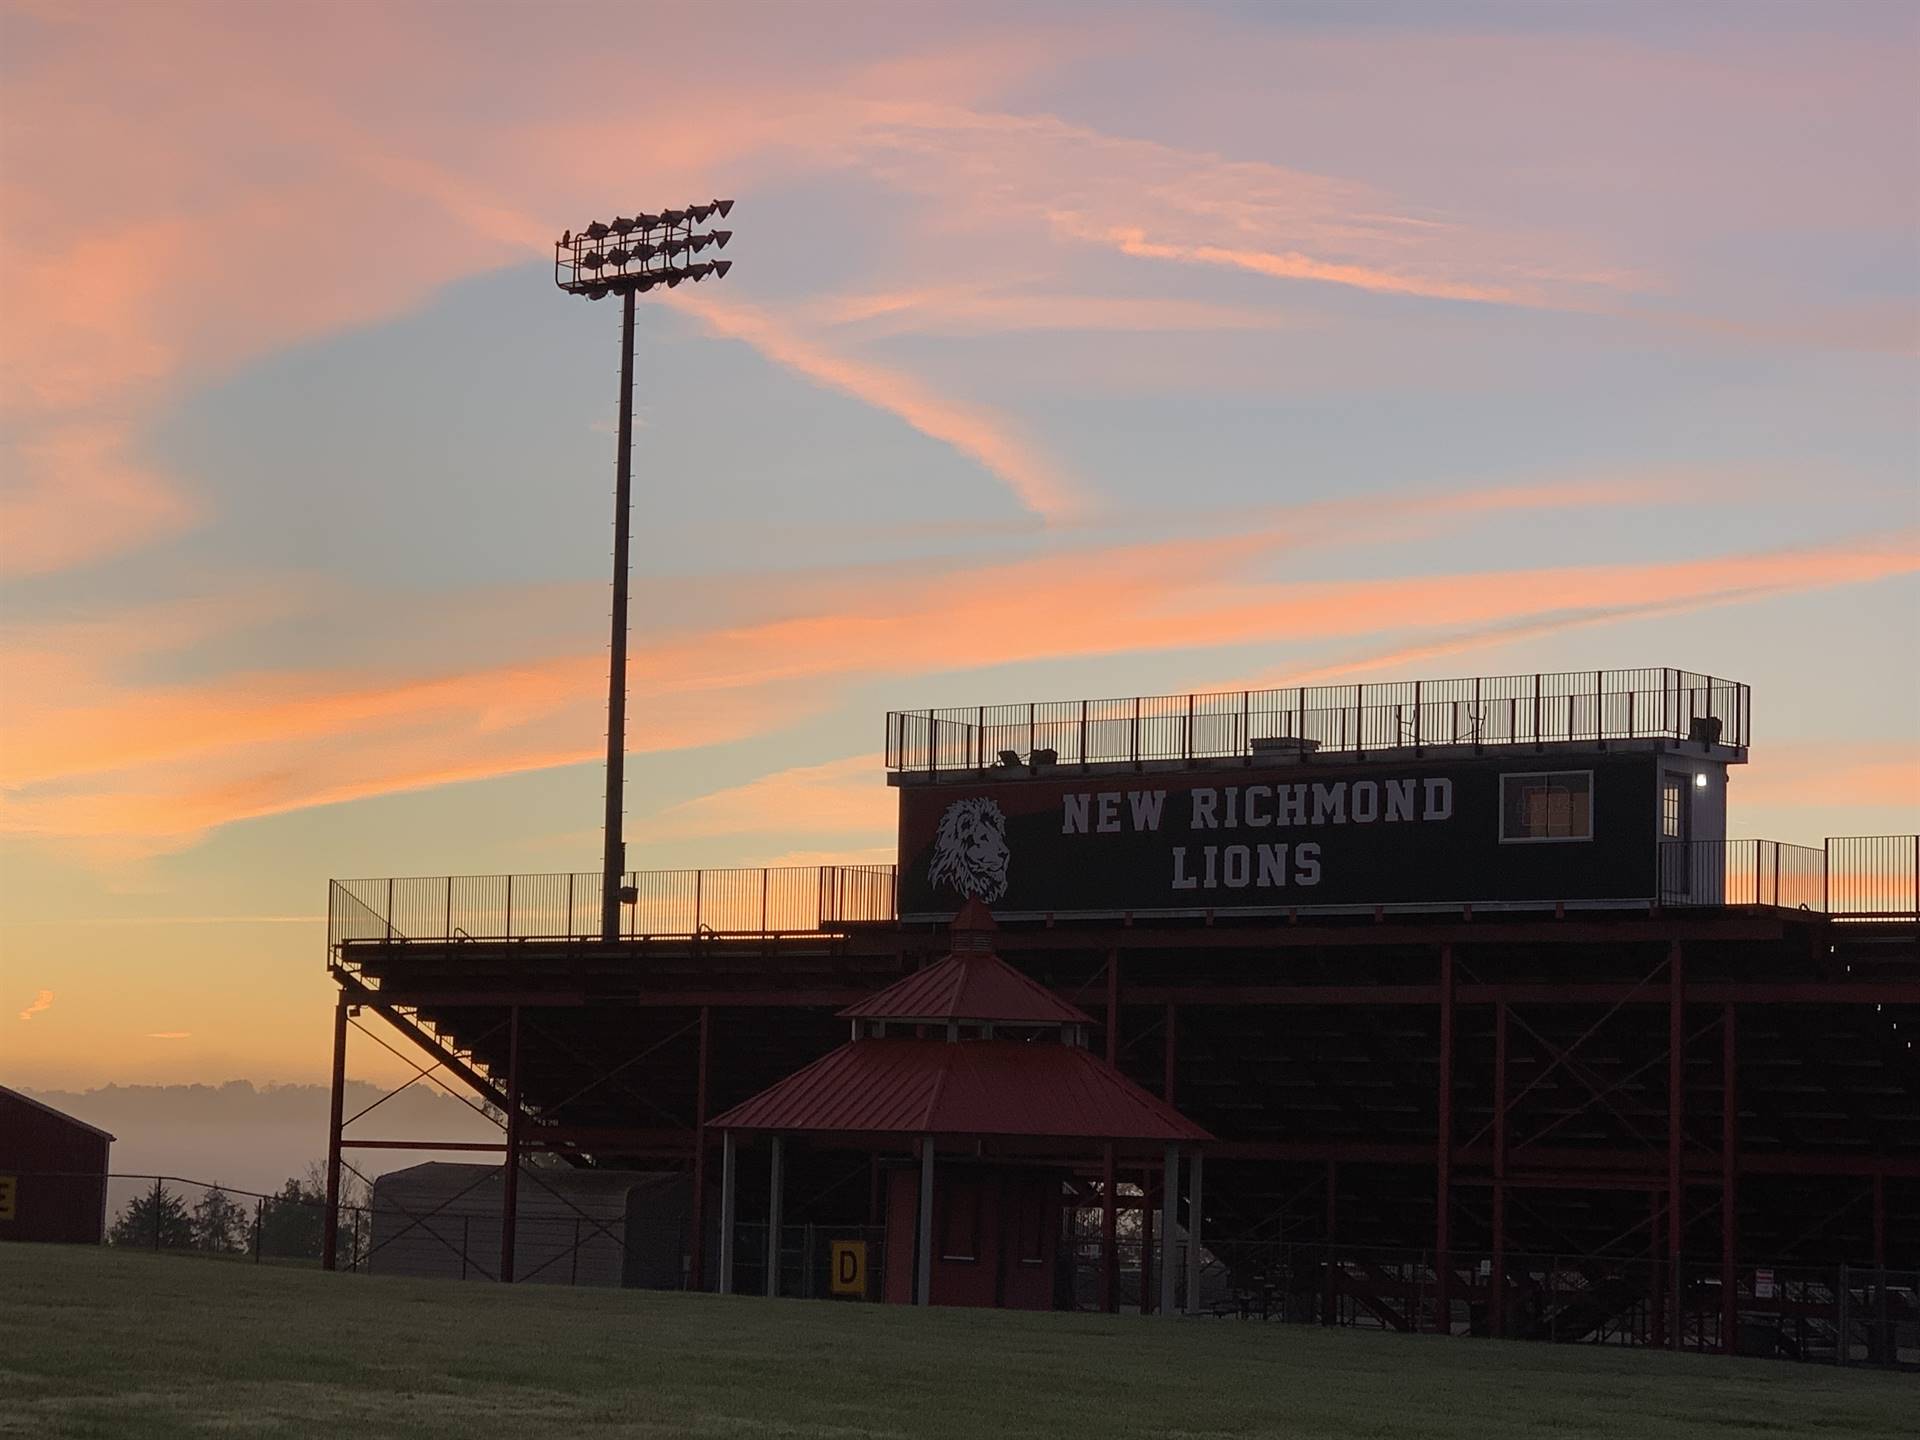 NRHS stadium at sunrise with what appears to be R written in the sky above